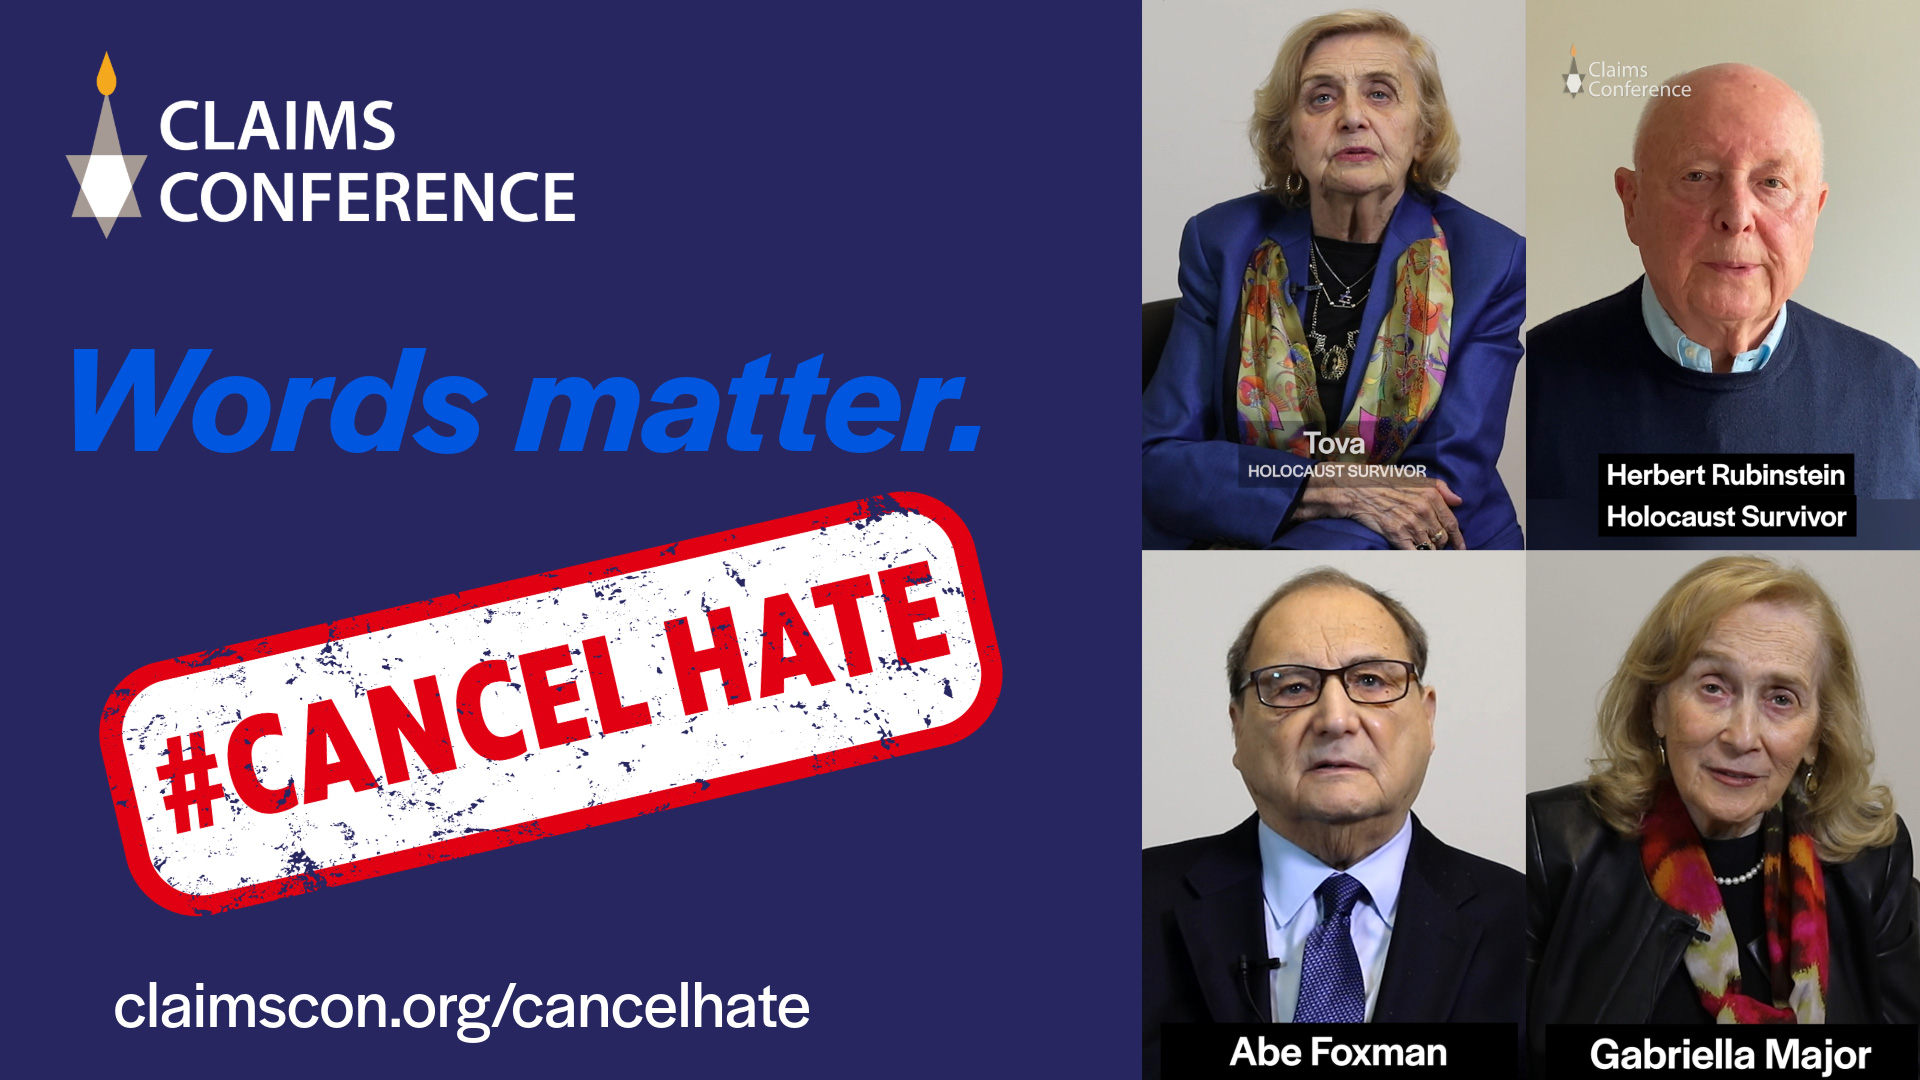 Cancel Hate